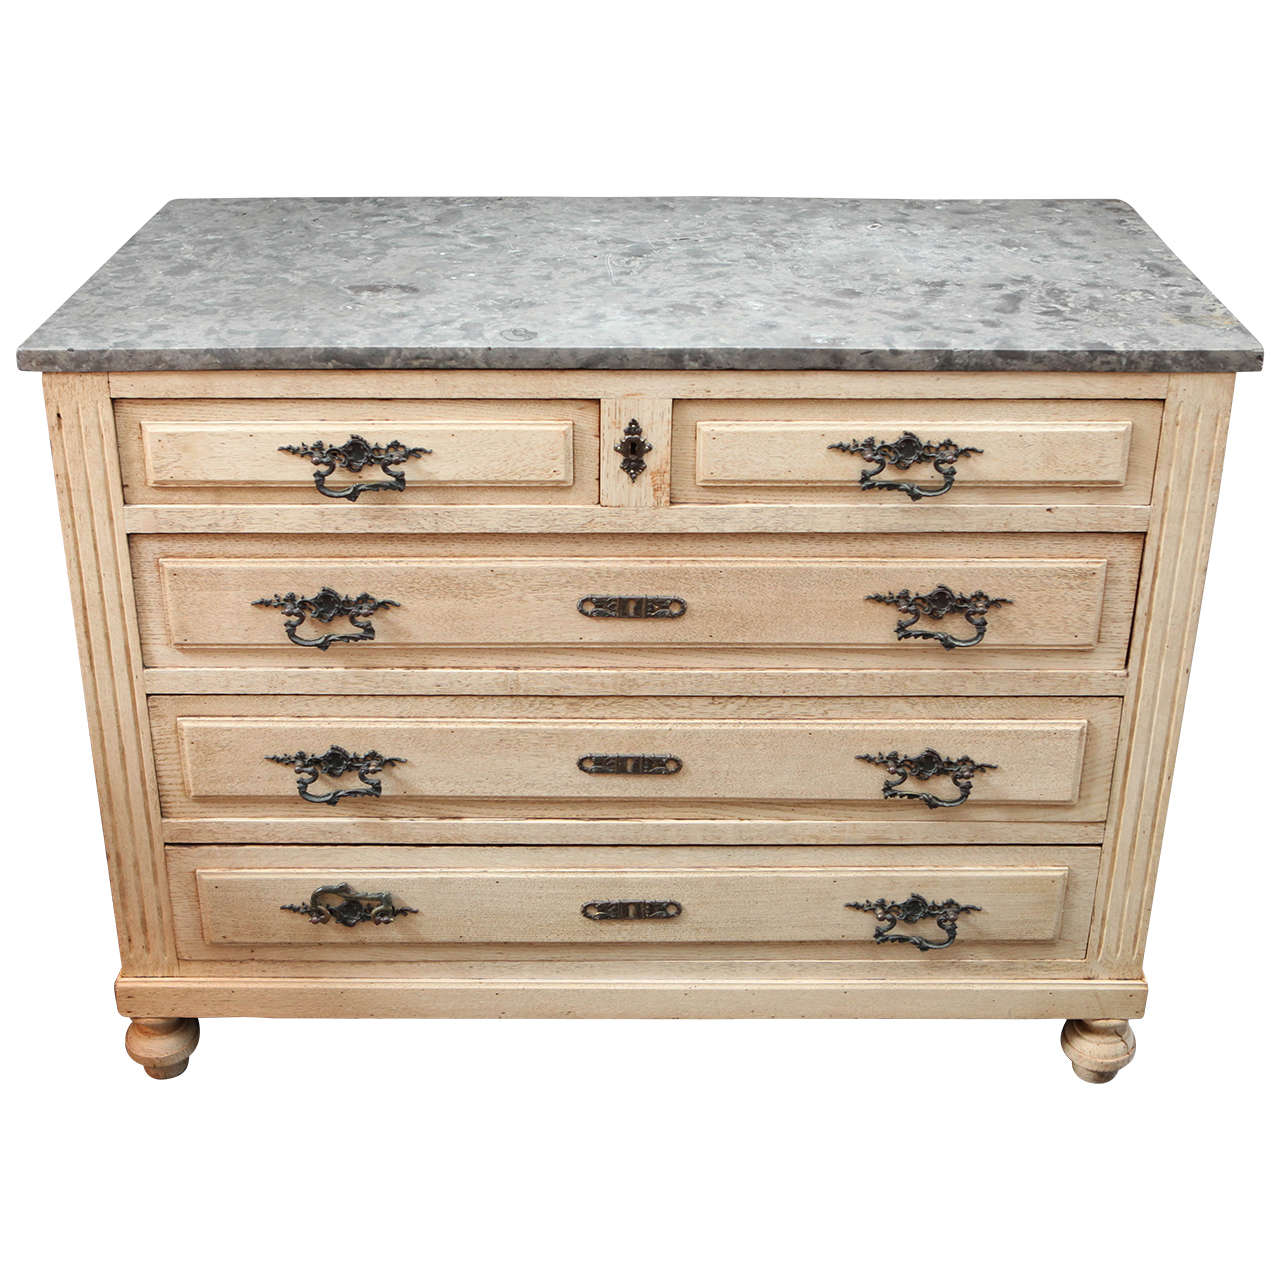 Bleached Oak Chest of Drawers with Grey Marble Top, circa 1900